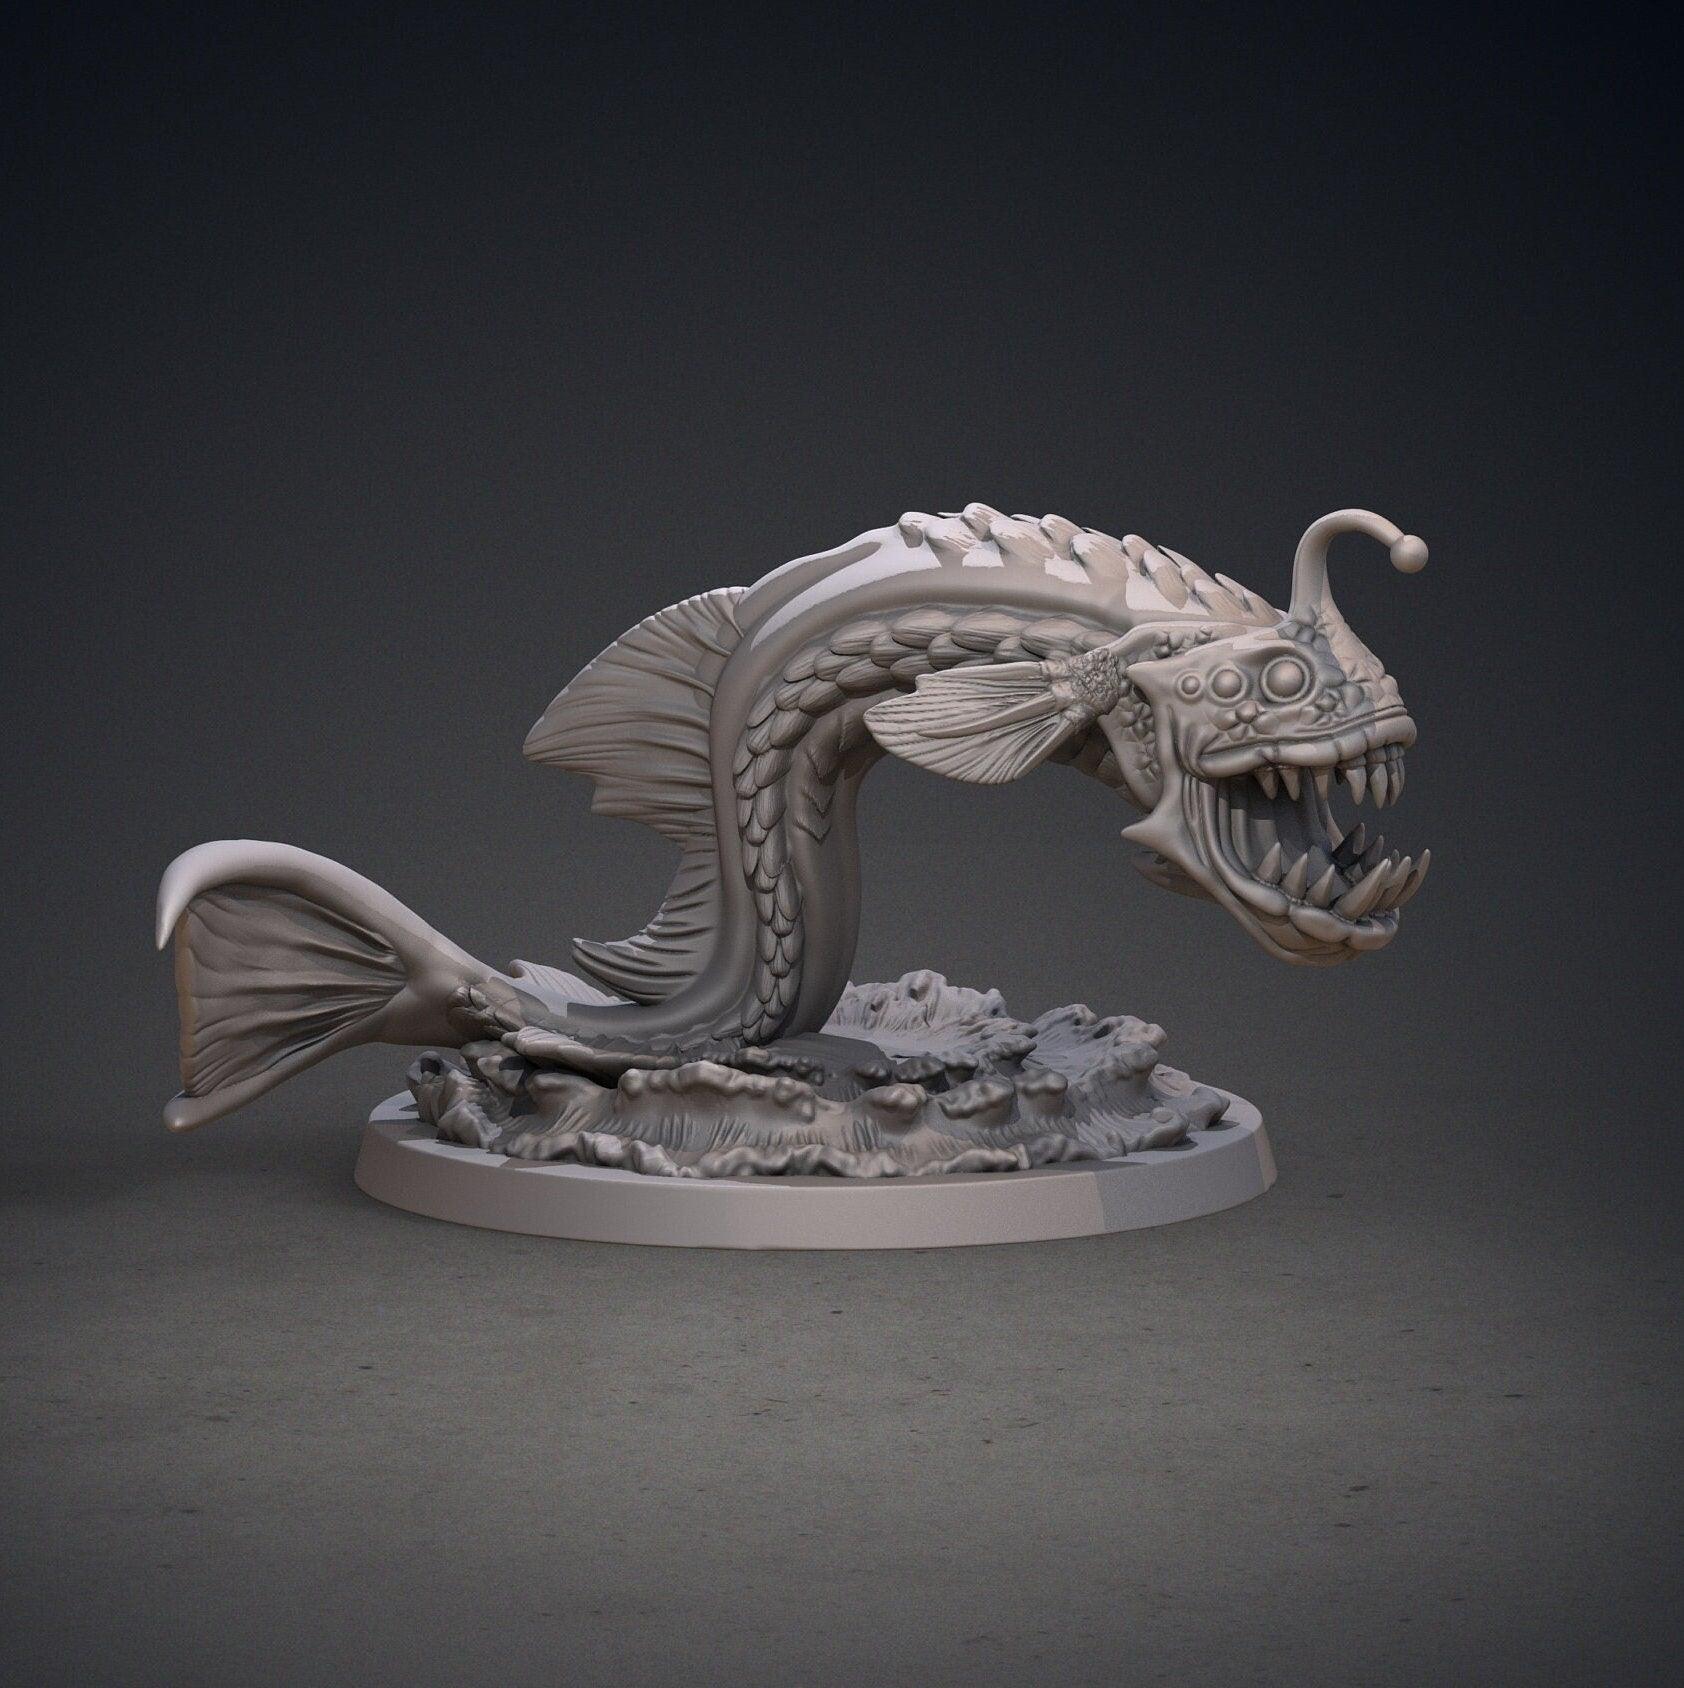 Giant Anglerfish miniature | Clay Cyanide | Maori miniature | Tabletop Gaming | DnD Miniature | Dungeons and Dragons | - Plague Miniatures shop for DnD Miniatures